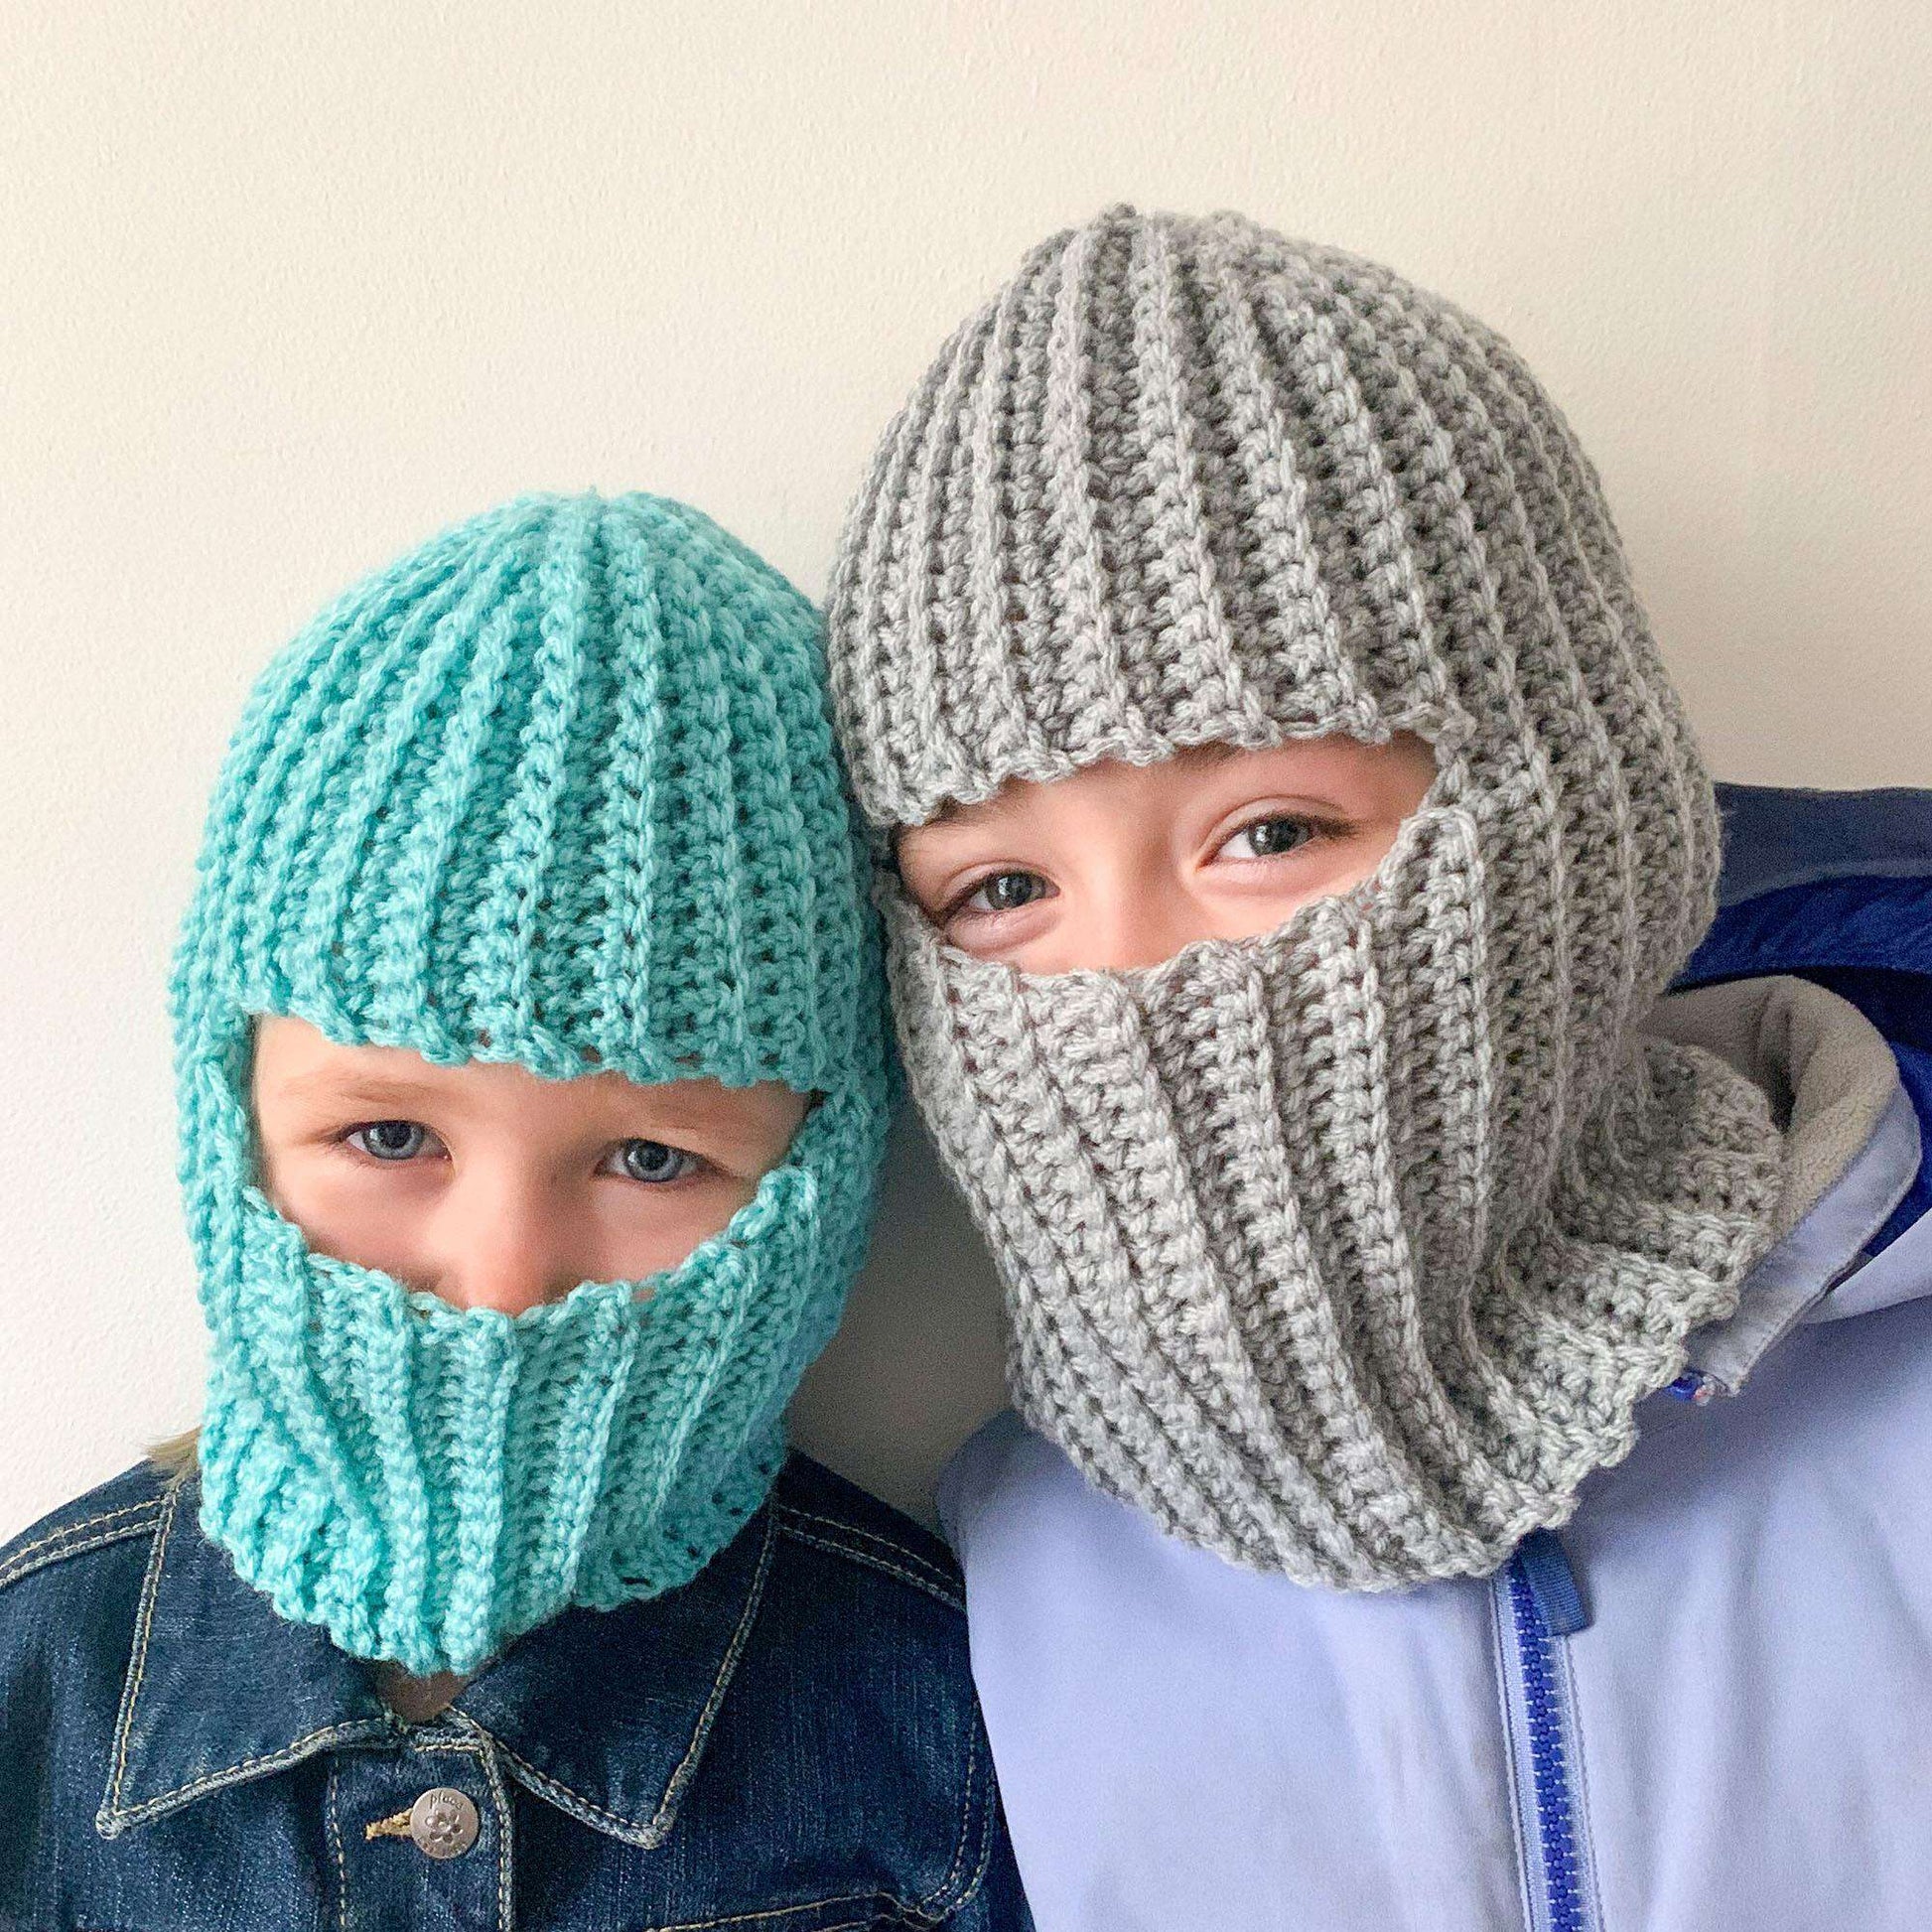 Red Heart Crochet Ribbed Balaclava For Kids Pattern